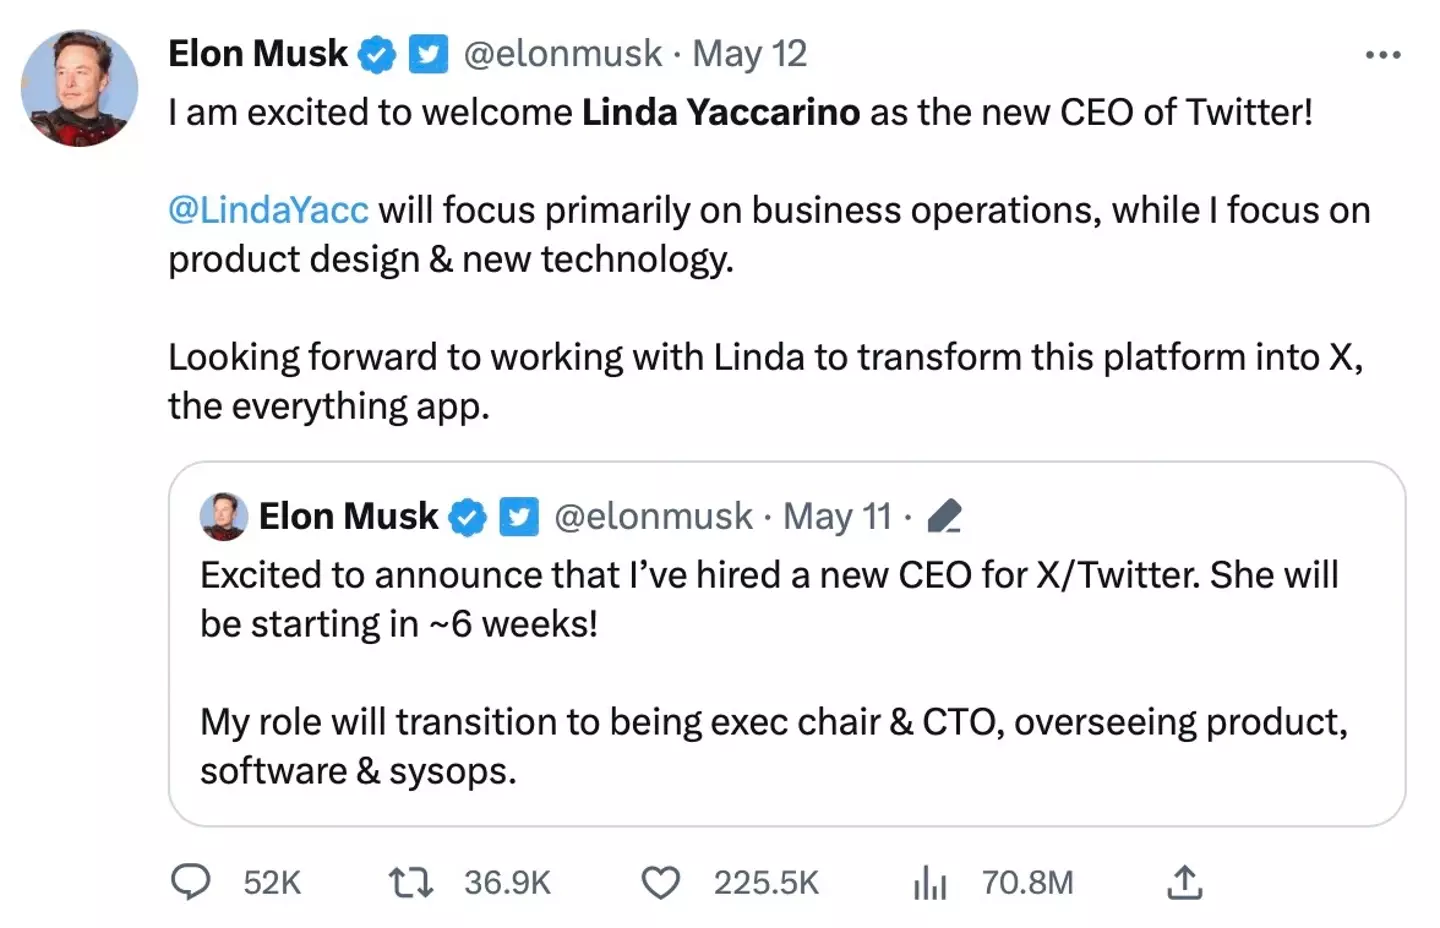 On 12 May, Musk confirmed Yaccarino's arrival.